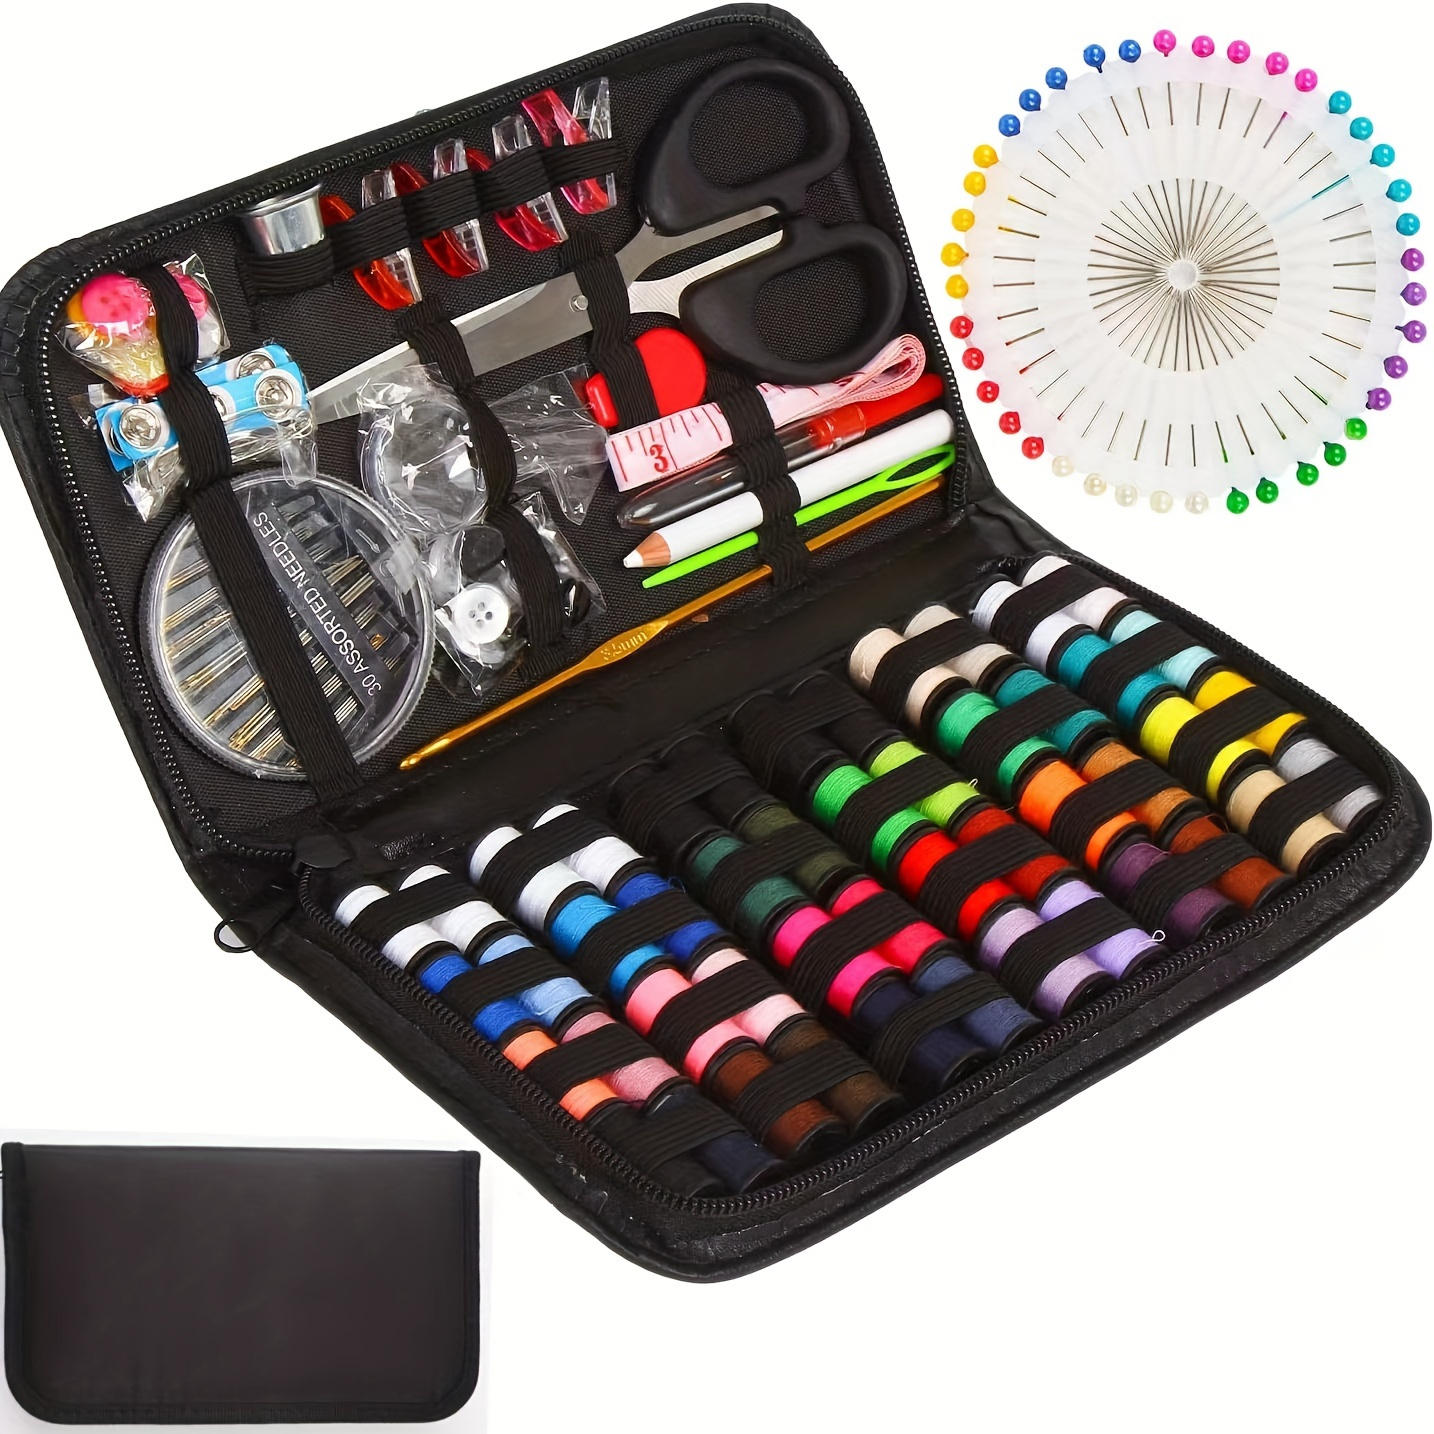 

Professional 172 Pcs Sewing Kit Set With Polyester Thread, Tailor Scissors, Needles, Pins, Thimble – Complete Hand Sewing Accessories For Clothing Repair & Crafting, Uncharged Tool Set Without Battery